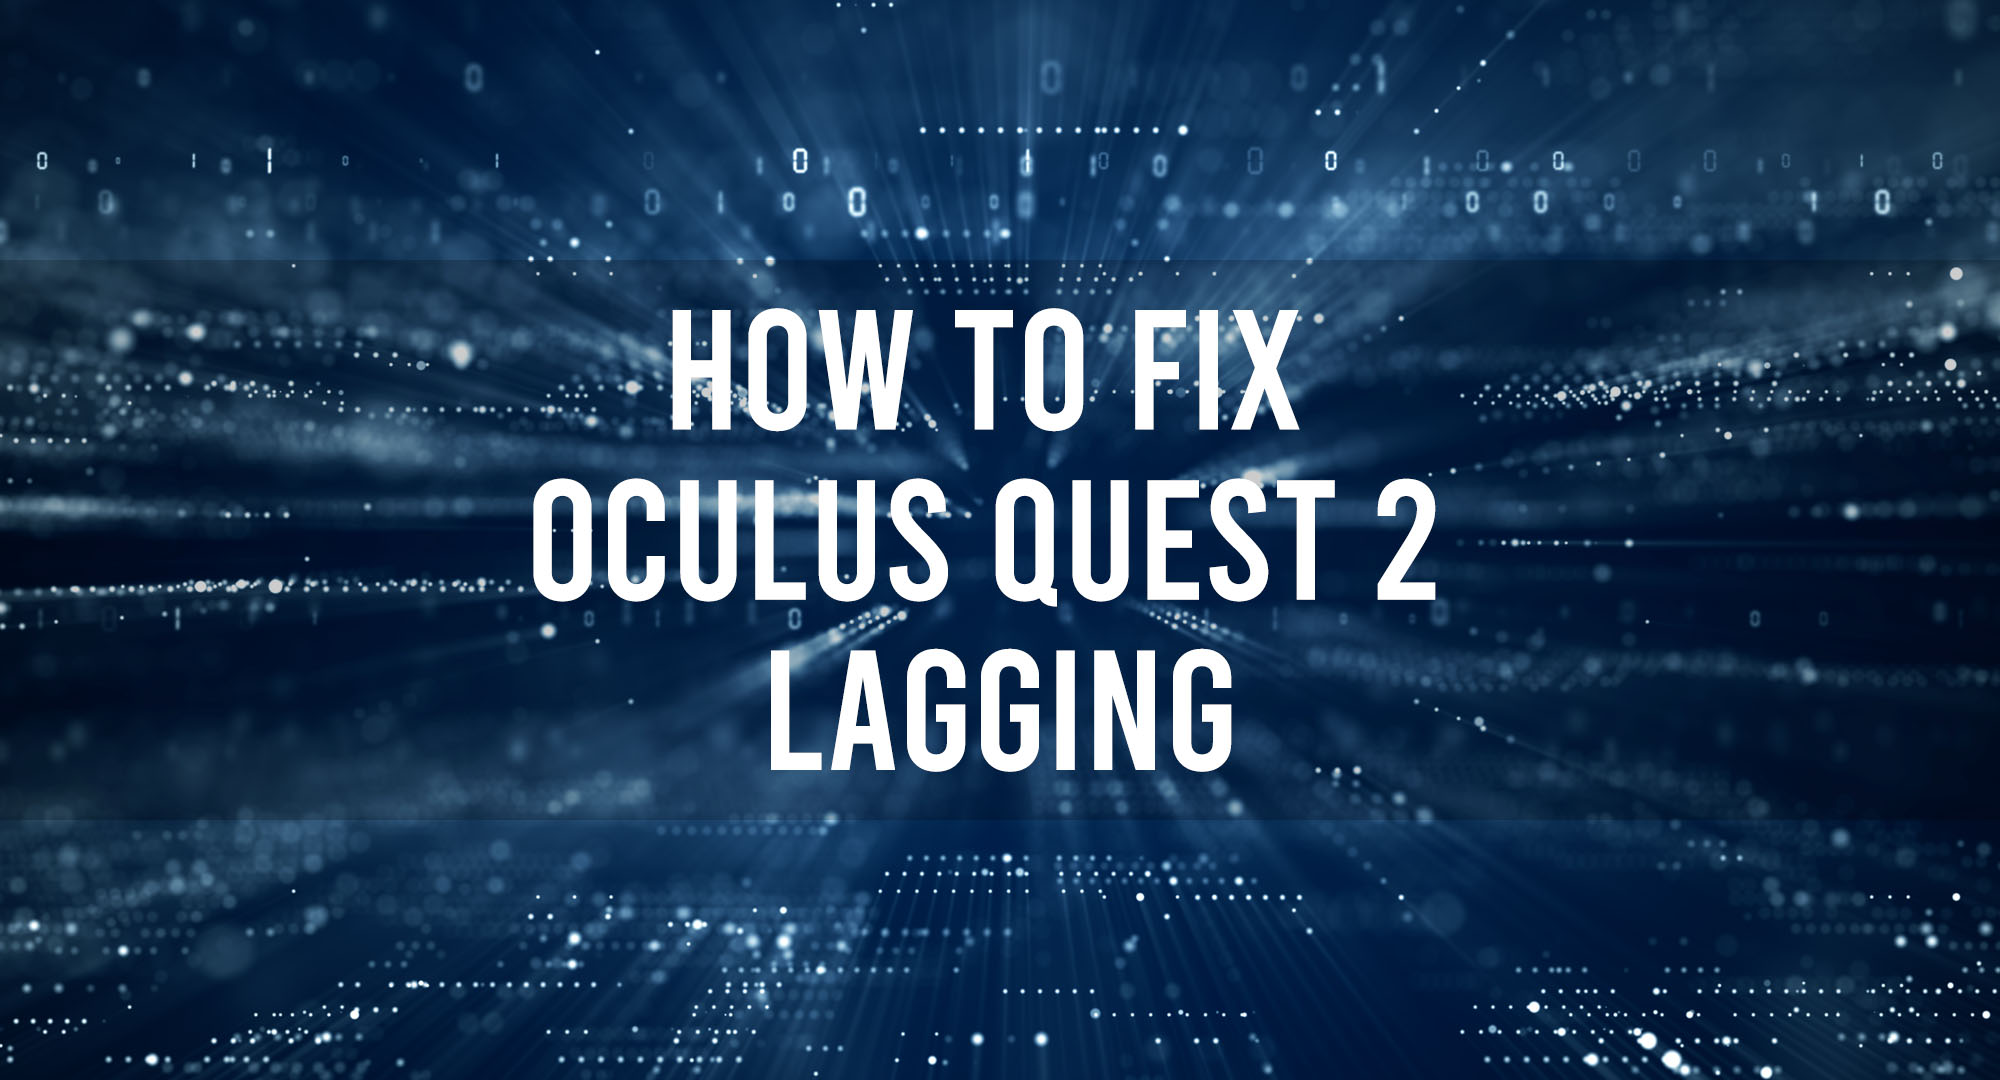 How to fix Oculus Quest 2 Lagging